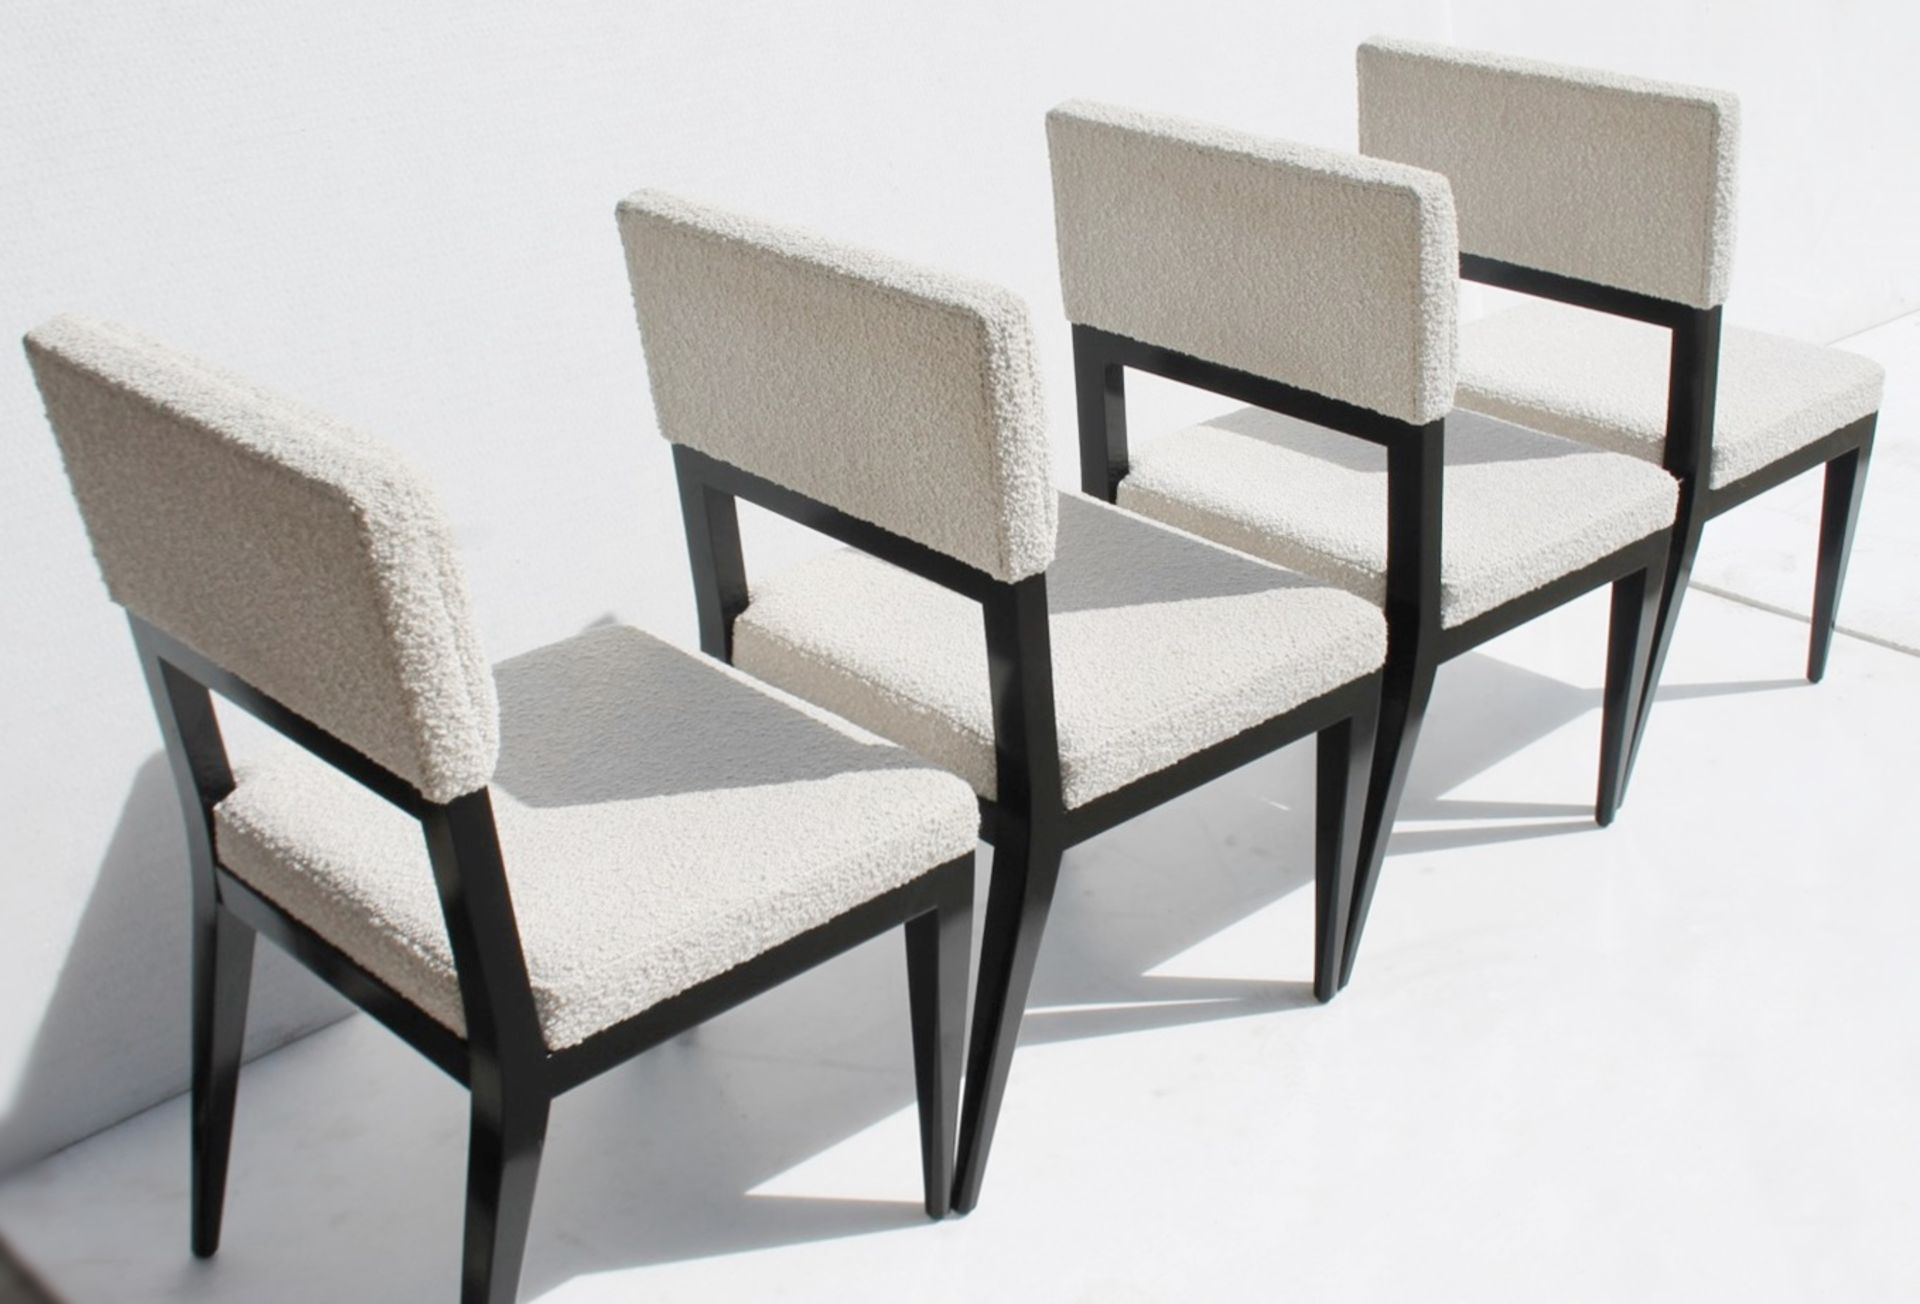 8 x AMY SOMERVILLE LONDON 'Resplendent' Bespoke Dining Chairs - Total Original Price £25,920 - Image 7 of 18